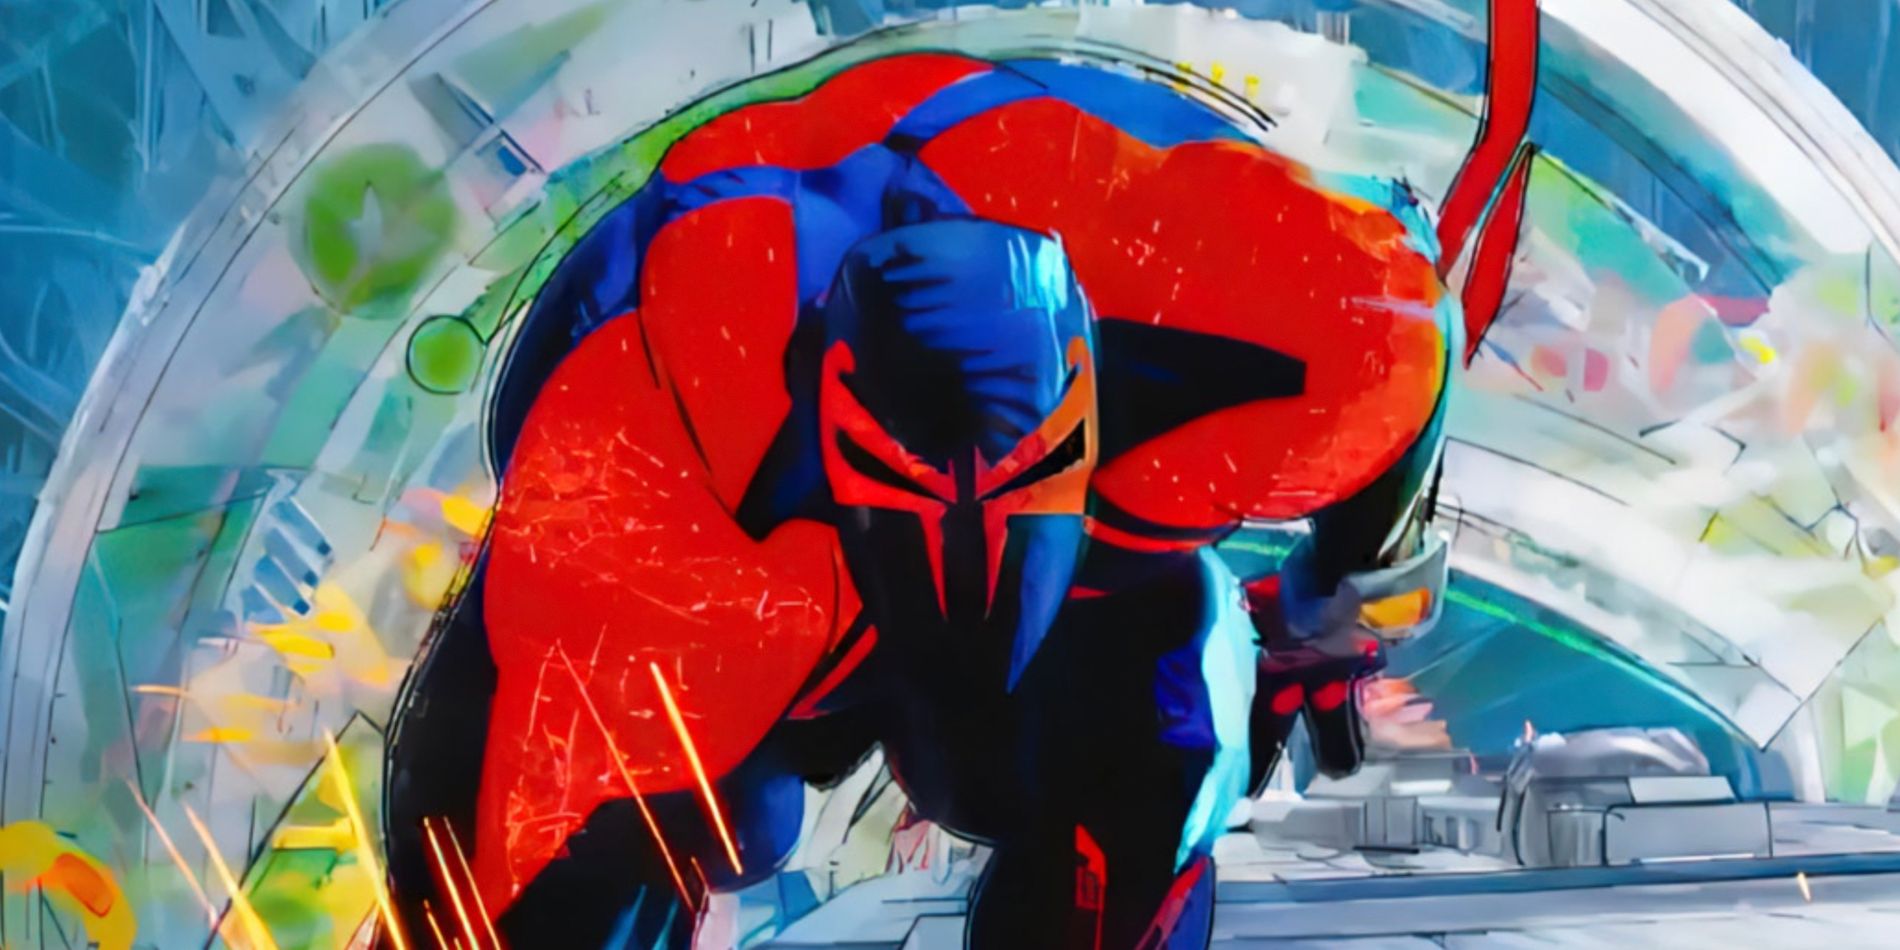 Spider-Man 2099 leaps into action in Spider-Man: Across the Spider-Verse.